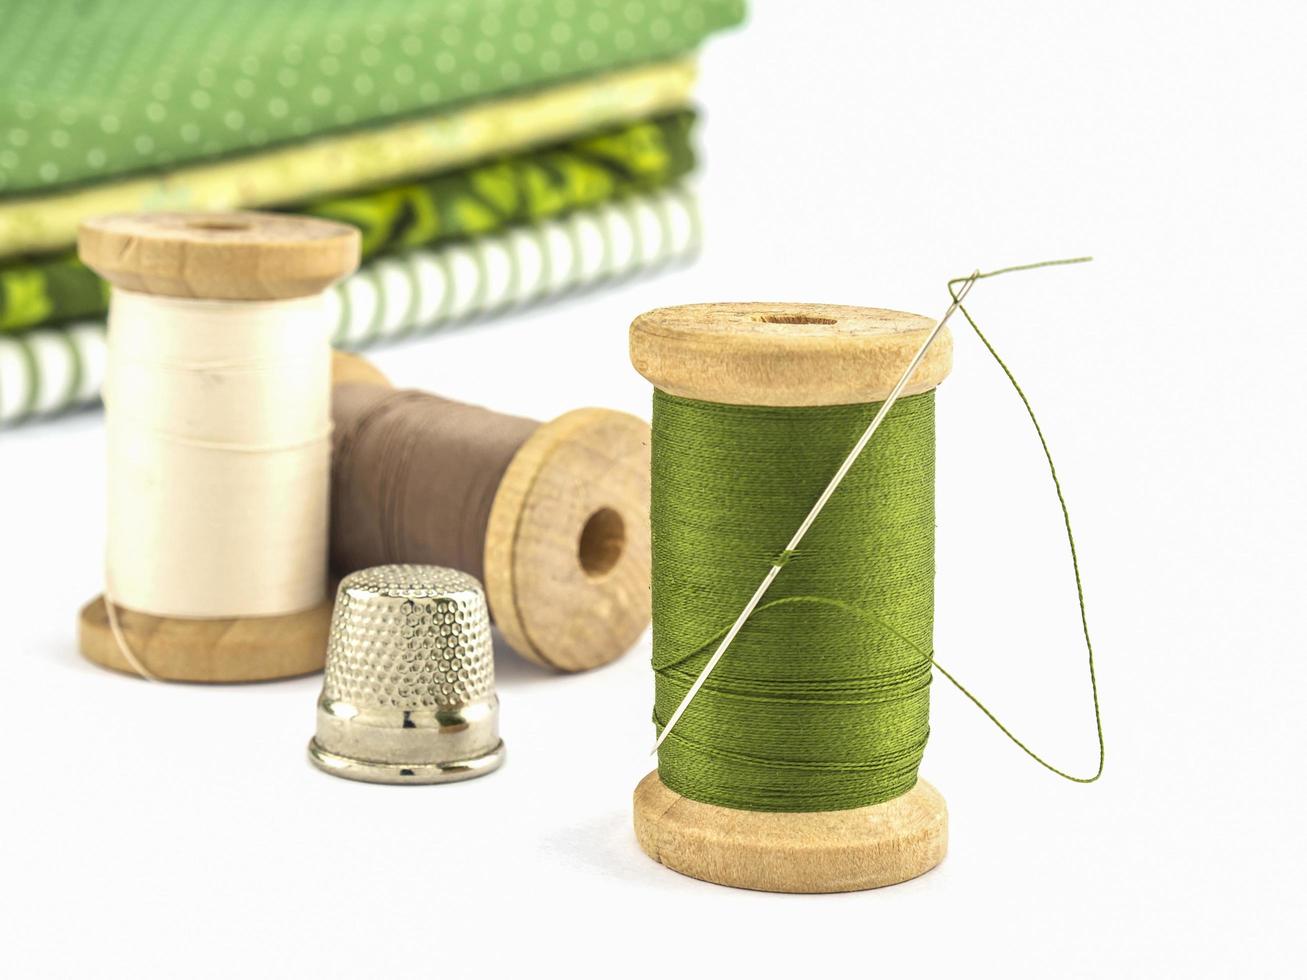 Wooden spool of thread embroidery set with cloth over white background photo